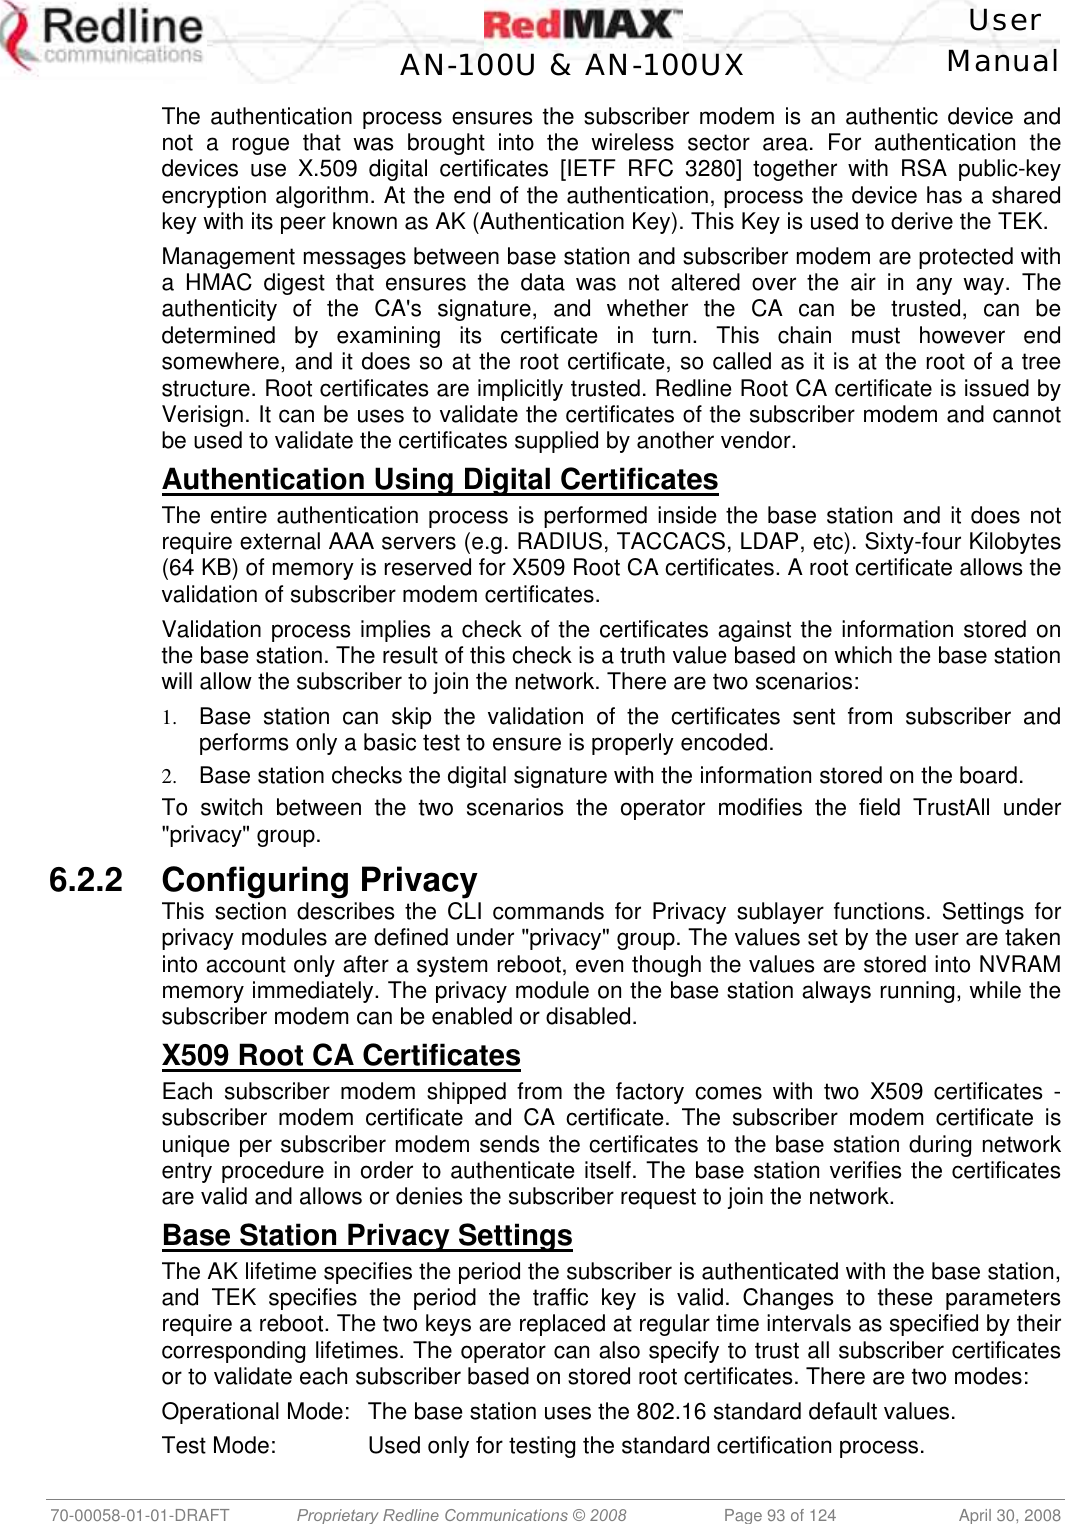    User  AN-100U &amp; AN-100UX Manual   70-00058-01-01-DRAFT  Proprietary Redline Communications © 2008   Page 93 of 124  April 30, 2008 The authentication process ensures the subscriber modem is an authentic device and not a rogue that was brought into the wireless sector area. For authentication the devices use X.509 digital certificates [IETF RFC 3280] together with RSA public-key encryption algorithm. At the end of the authentication, process the device has a shared key with its peer known as AK (Authentication Key). This Key is used to derive the TEK.  Management messages between base station and subscriber modem are protected with a HMAC digest that ensures the data was not altered over the air in any way. The authenticity of the CA&apos;s signature, and whether the CA can be trusted, can be determined by examining its certificate in turn. This chain must however end somewhere, and it does so at the root certificate, so called as it is at the root of a tree structure. Root certificates are implicitly trusted. Redline Root CA certificate is issued by Verisign. It can be uses to validate the certificates of the subscriber modem and cannot be used to validate the certificates supplied by another vendor. Authentication Using Digital Certificates The entire authentication process is performed inside the base station and it does not require external AAA servers (e.g. RADIUS, TACCACS, LDAP, etc). Sixty-four Kilobytes (64 KB) of memory is reserved for X509 Root CA certificates. A root certificate allows the validation of subscriber modem certificates.  Validation process implies a check of the certificates against the information stored on the base station. The result of this check is a truth value based on which the base station will allow the subscriber to join the network. There are two scenarios: 1.  Base station can skip the validation of the certificates sent from subscriber and performs only a basic test to ensure is properly encoded. 2.  Base station checks the digital signature with the information stored on the board. To switch between the two scenarios the operator modifies the field TrustAll under &quot;privacy&quot; group. 6.2.2 Configuring Privacy This section describes the CLI commands for Privacy sublayer functions. Settings for privacy modules are defined under &quot;privacy&quot; group. The values set by the user are taken into account only after a system reboot, even though the values are stored into NVRAM memory immediately. The privacy module on the base station always running, while the subscriber modem can be enabled or disabled. X509 Root CA Certificates Each subscriber modem shipped from the factory comes with two X509 certificates - subscriber modem certificate and CA certificate. The subscriber modem certificate is unique per subscriber modem sends the certificates to the base station during network entry procedure in order to authenticate itself. The base station verifies the certificates are valid and allows or denies the subscriber request to join the network. Base Station Privacy Settings The AK lifetime specifies the period the subscriber is authenticated with the base station, and TEK specifies the period the traffic key is valid. Changes to these parameters require a reboot. The two keys are replaced at regular time intervals as specified by their corresponding lifetimes. The operator can also specify to trust all subscriber certificates or to validate each subscriber based on stored root certificates. There are two modes: Operational Mode:  The base station uses the 802.16 standard default values. Test Mode:  Used only for testing the standard certification process. 